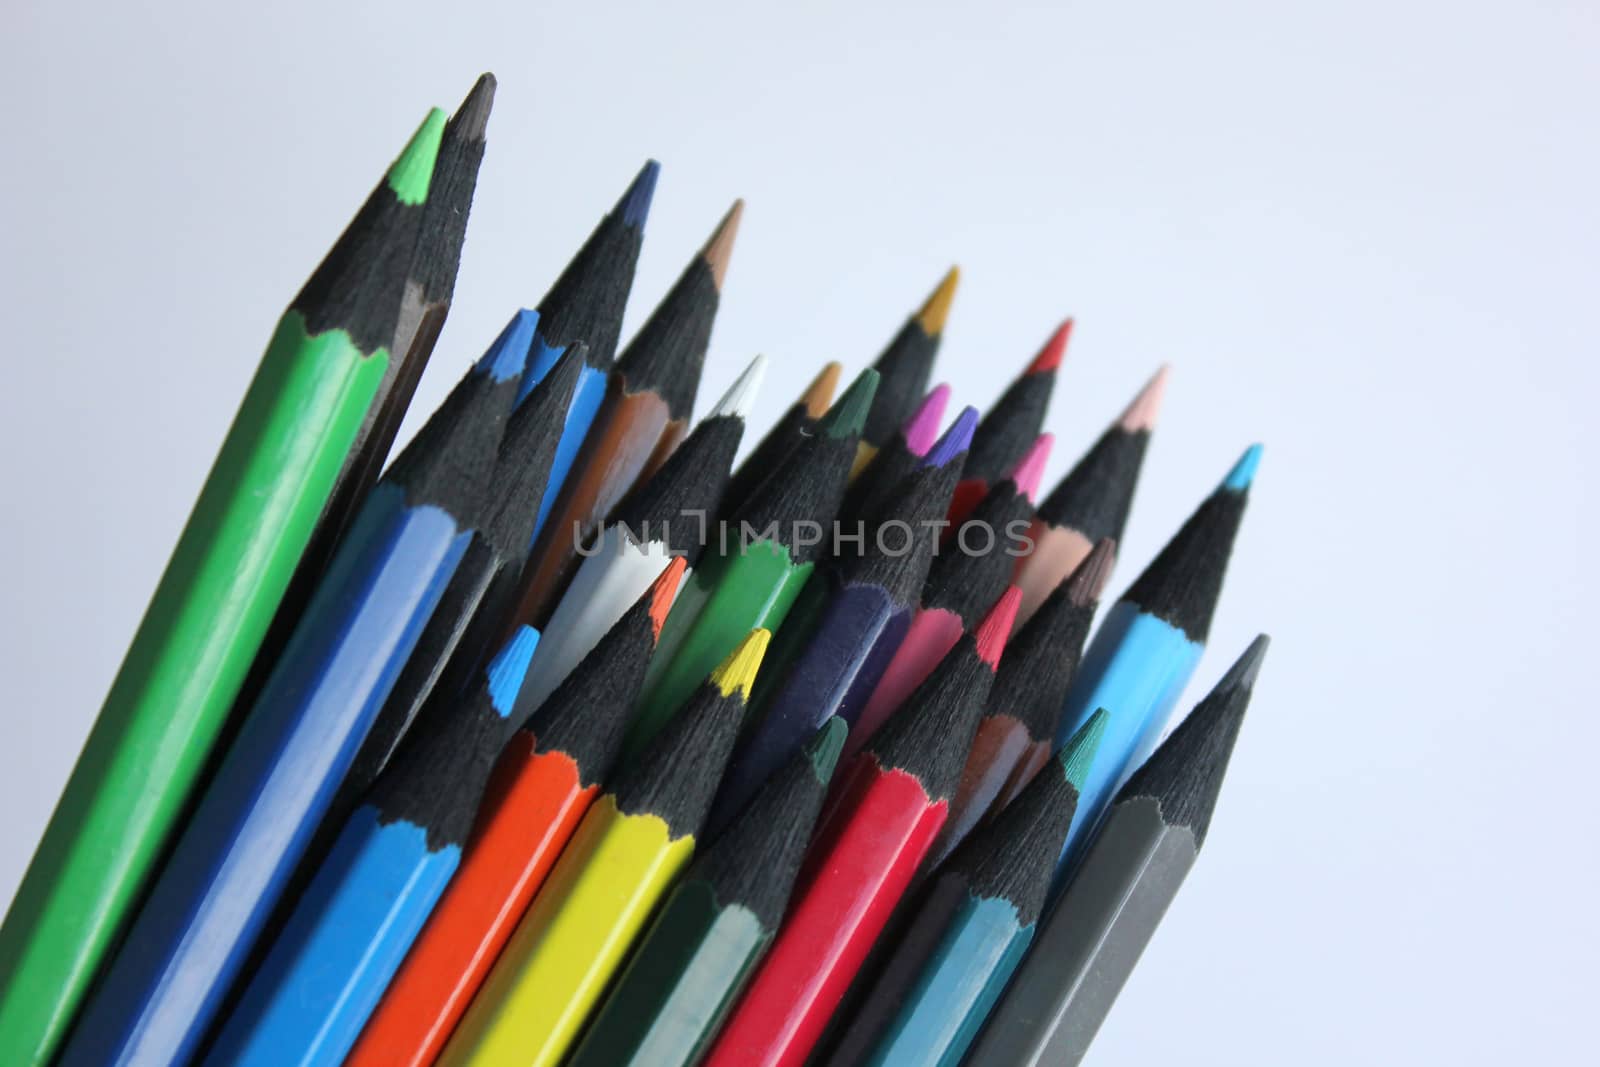 Set of colored pencils by Vadimdem